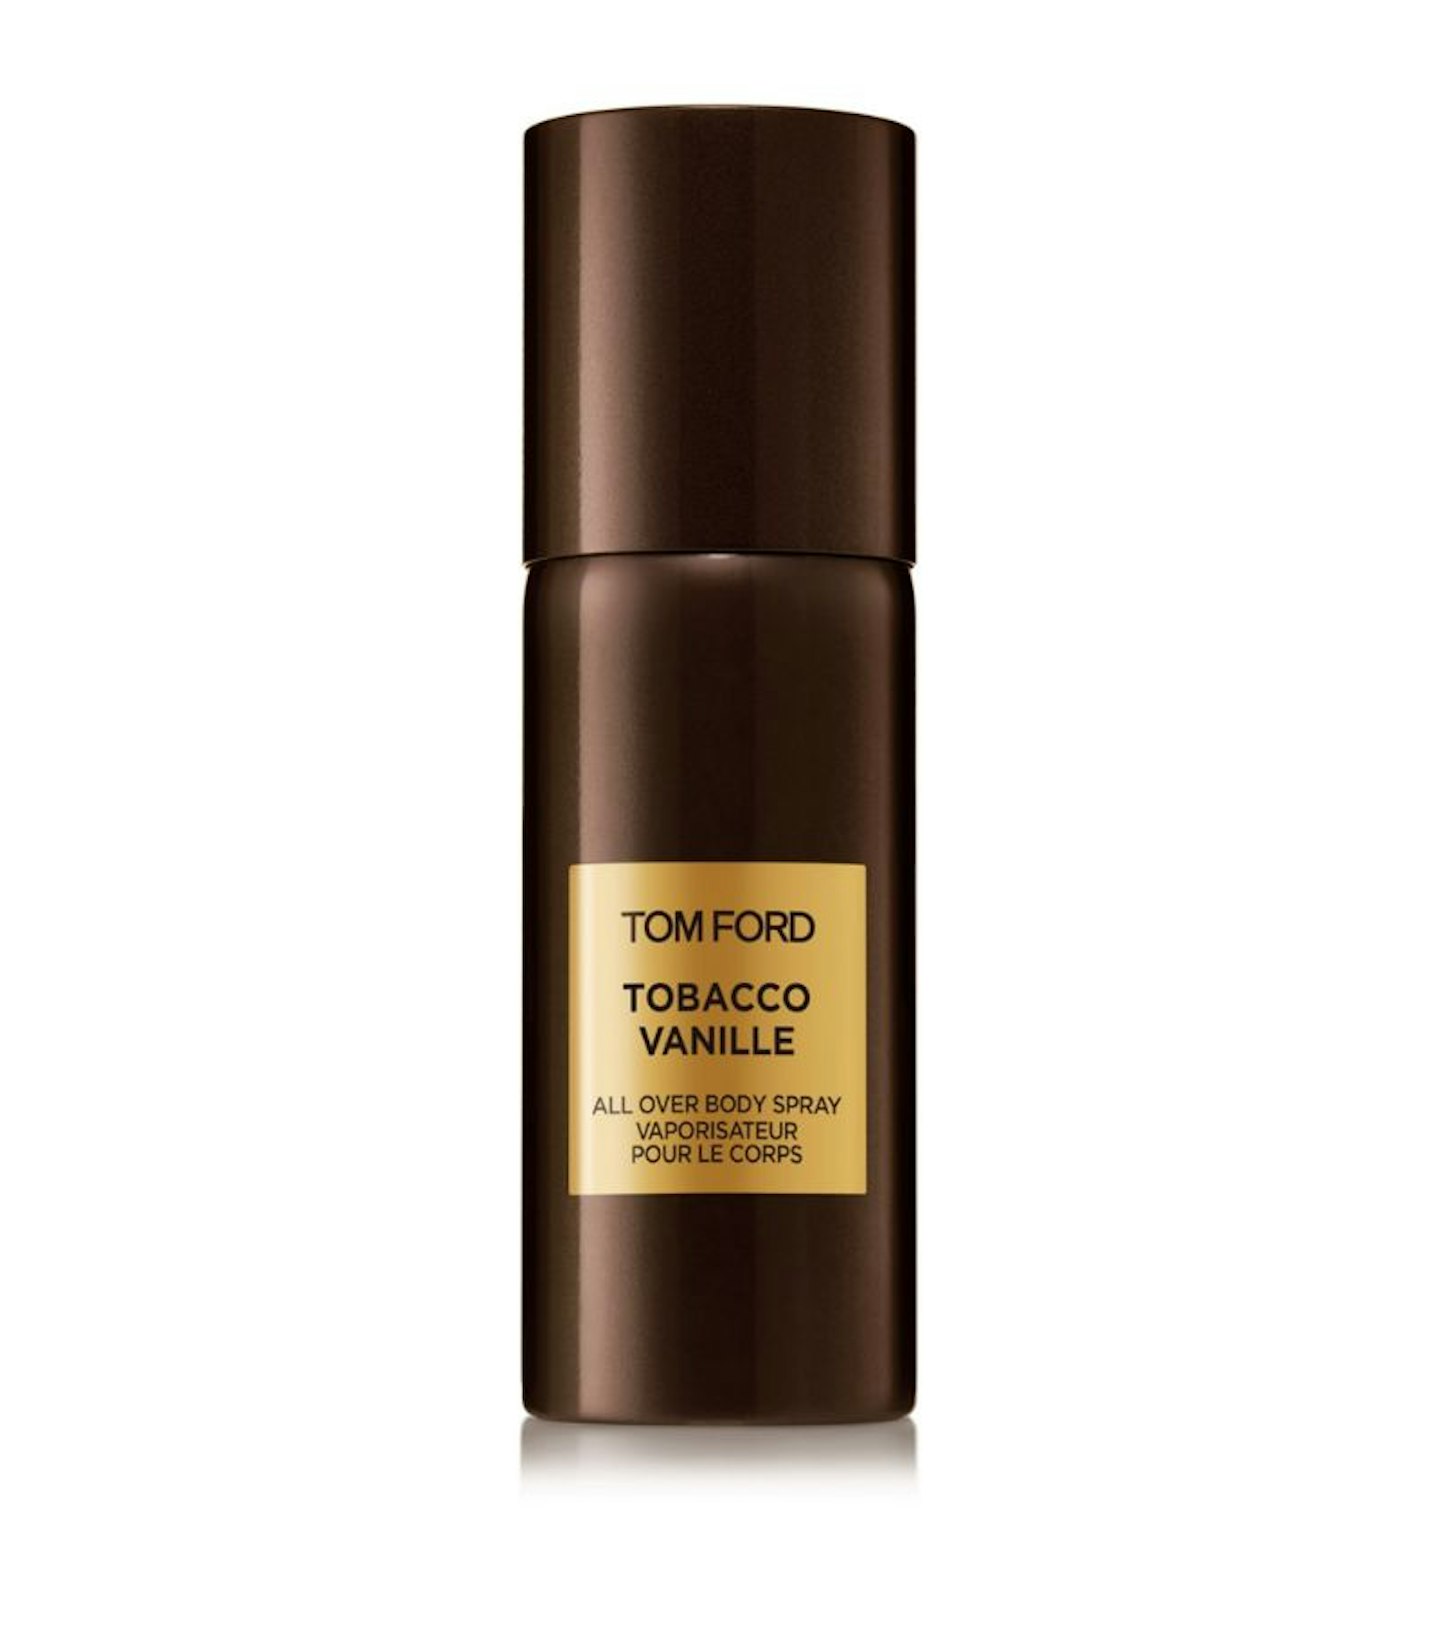 Tom Ford Tobacco Vanille All Over Body Spray, £52